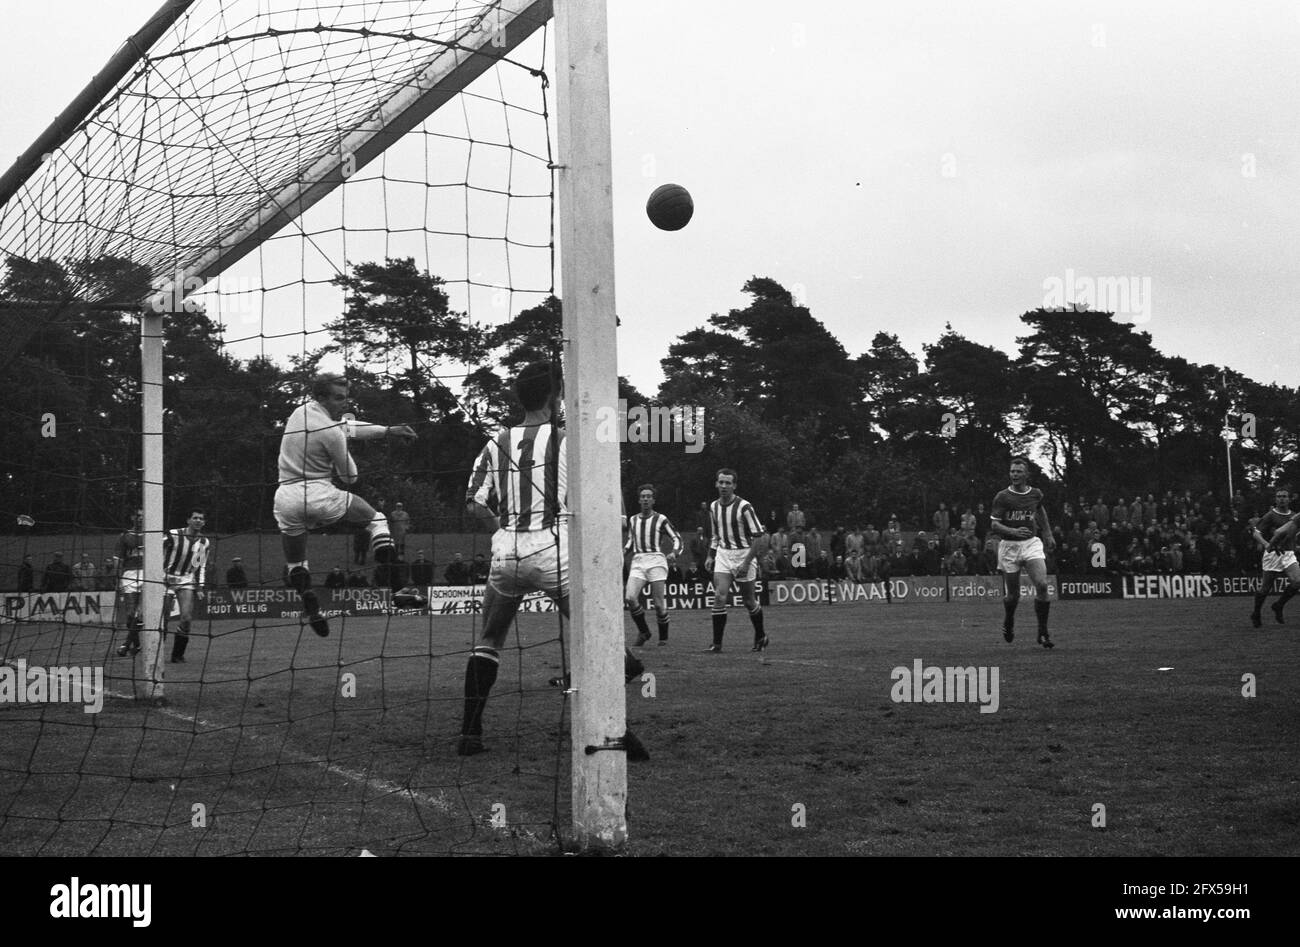 Wageningen against Blauw-Wit 2-1. Wageningen goalkeeper Bax keeps goal clean during attack, 29 September 1963, sports, soccer, The Netherlands, 20th century press agency photo, news to remember, documentary, historic photography 1945-1990, visual stories, human history of the Twentieth Century, capturing moments in time Stock Photo